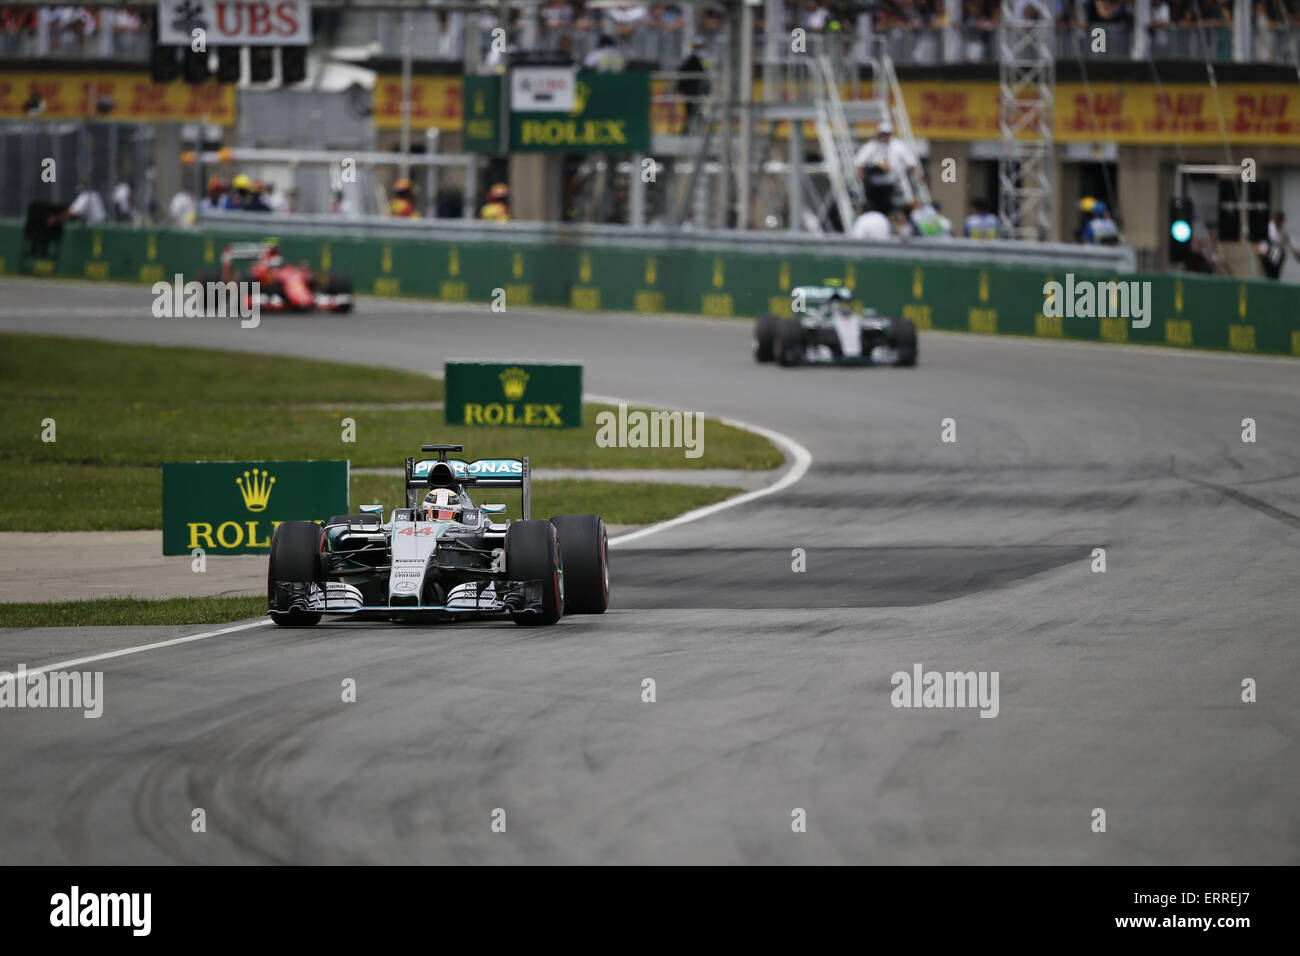 Montreal, Canada. 7th June, 2015. LEWIS HAMILTON of Great Britain and Mercedes AMG Petronas F1 Team drives during the 2015 Formula 1 Canadian Grand Prix at Gilles Villeneuve Circuit in Montreal, Canada. © James Gasperotti/ZUMA Wire/Alamy Live News Stock Photo